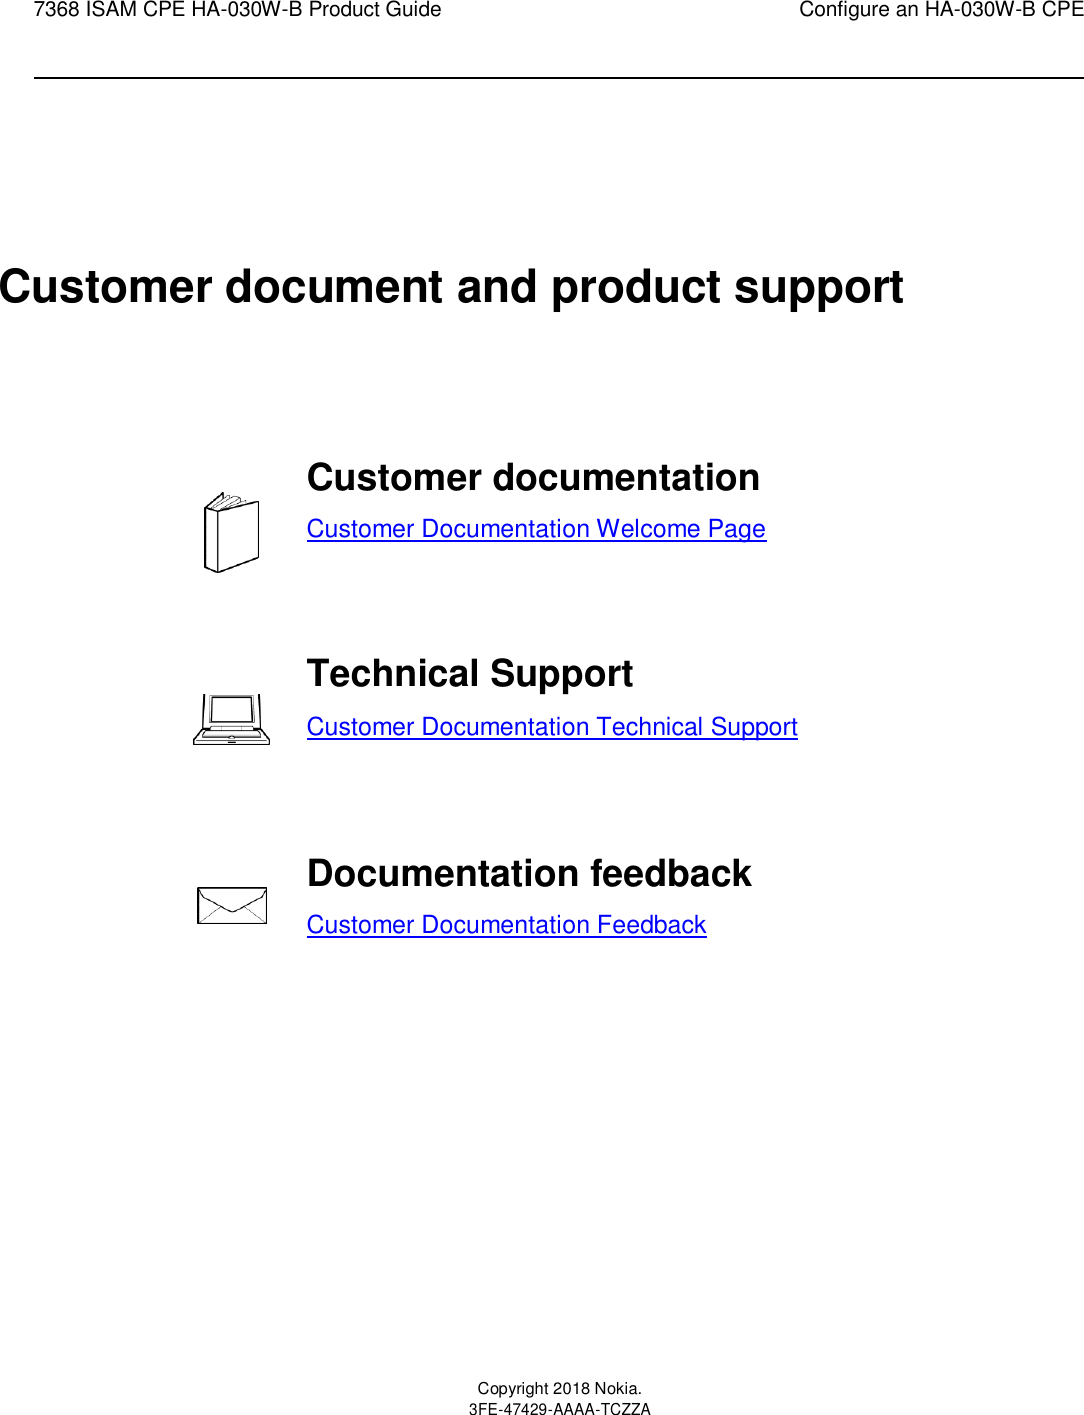 7368 ISAM CPE HA-030W-B Product Guide Configure an HA-030W-B CPE      Customer document and product support      Customer documentation Customer Documentation Welcome Page    Technical Support        Customer Documentation Technical Support  Documentation feedback Customer Documentation Feedback           Copyright 2018 Nokia. 3FE-47429-AAAA-TCZZA  